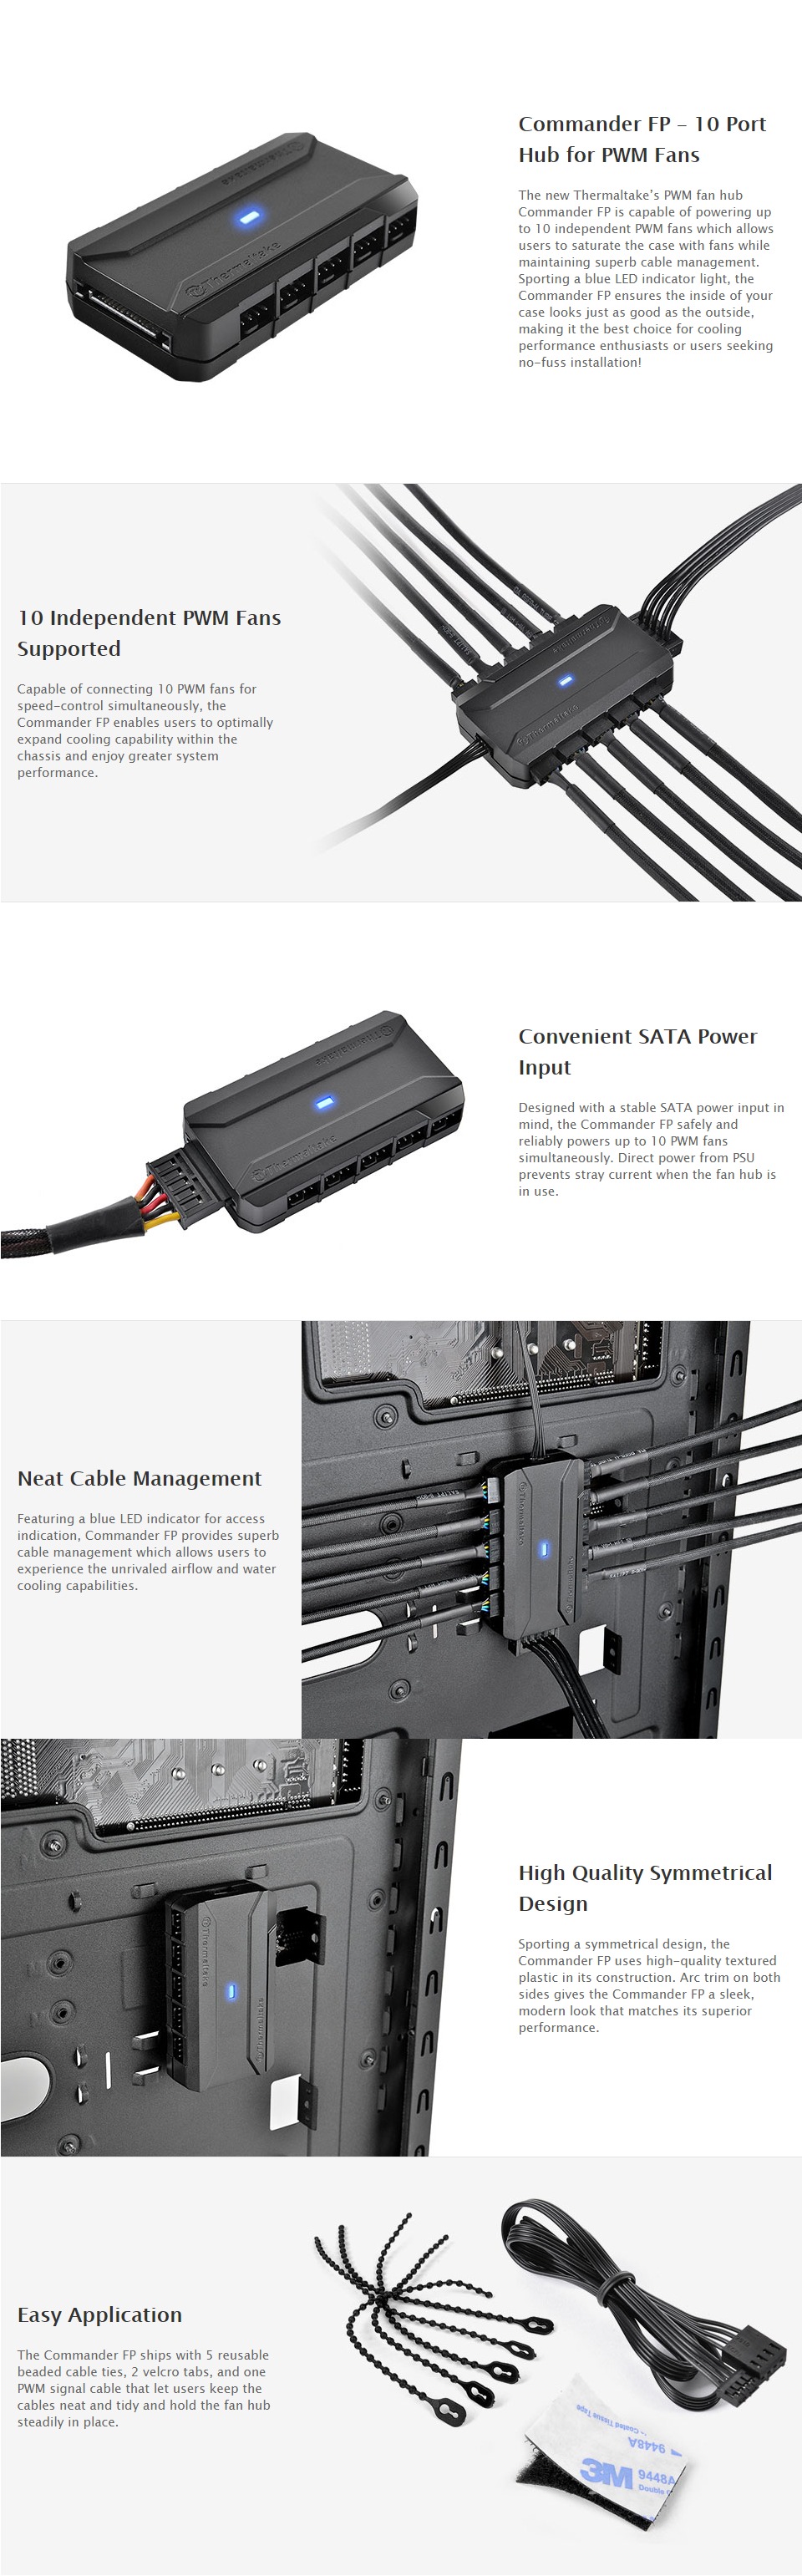 A large marketing image providing additional information about the product Thermaltake Commander FP - 10 Port PWM Fan Hub - Additional alt info not provided